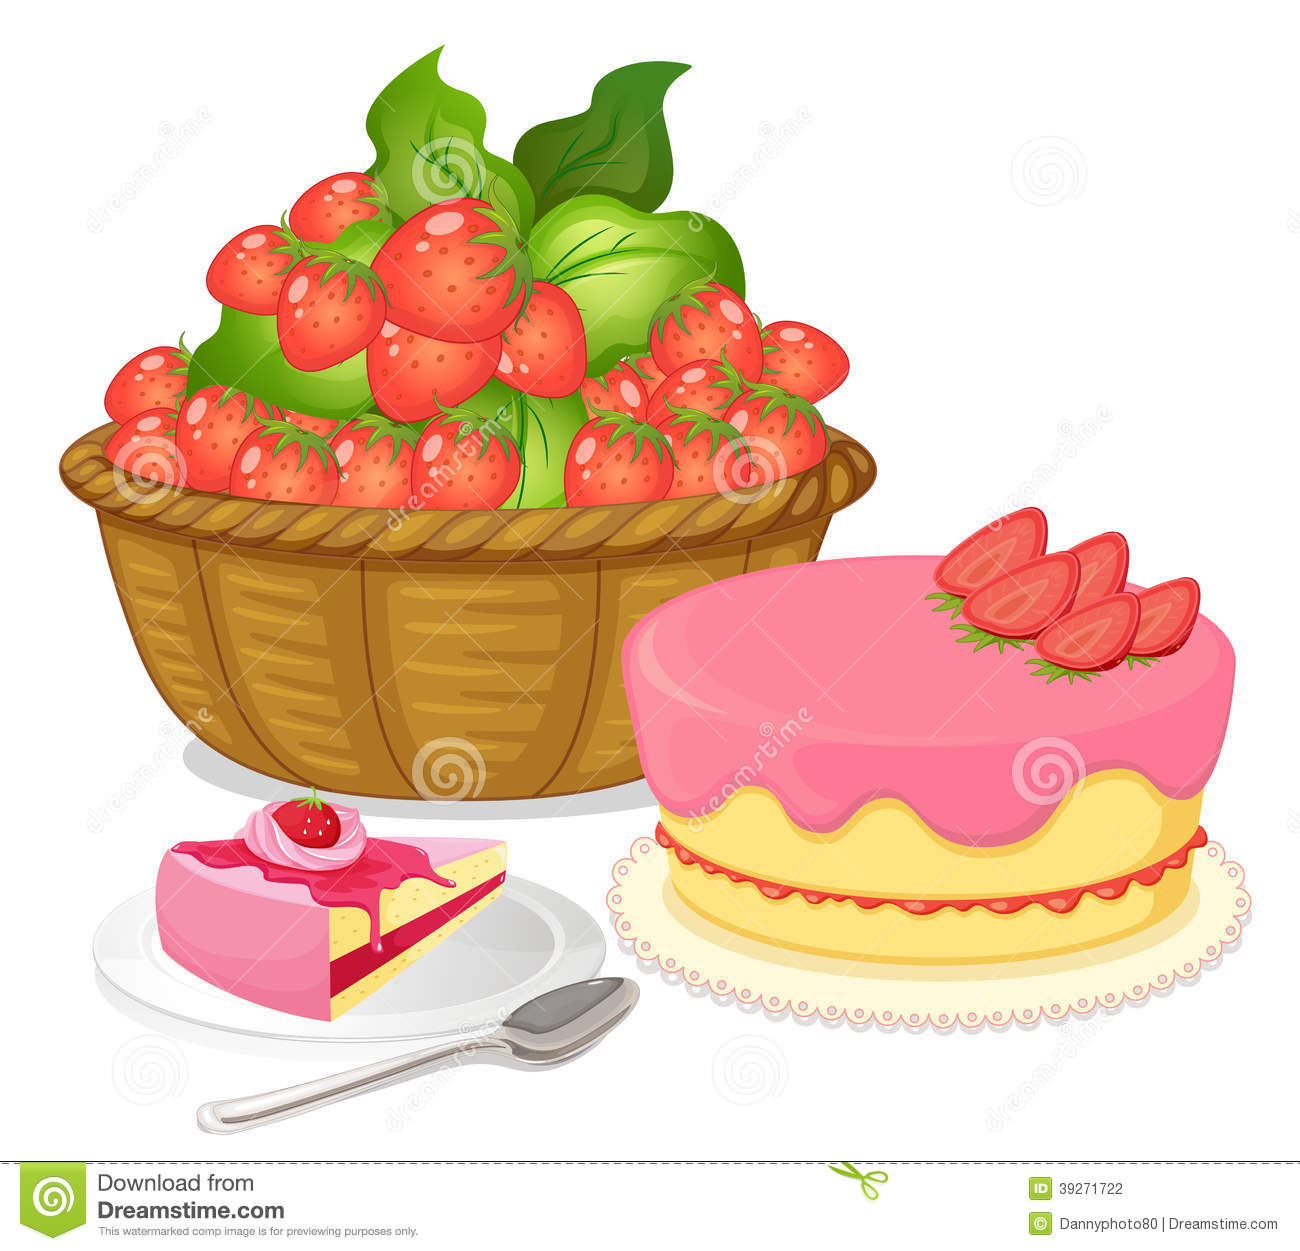 Basket Of Strawberries And A Strawberry Flavored Cake Stock Vector    